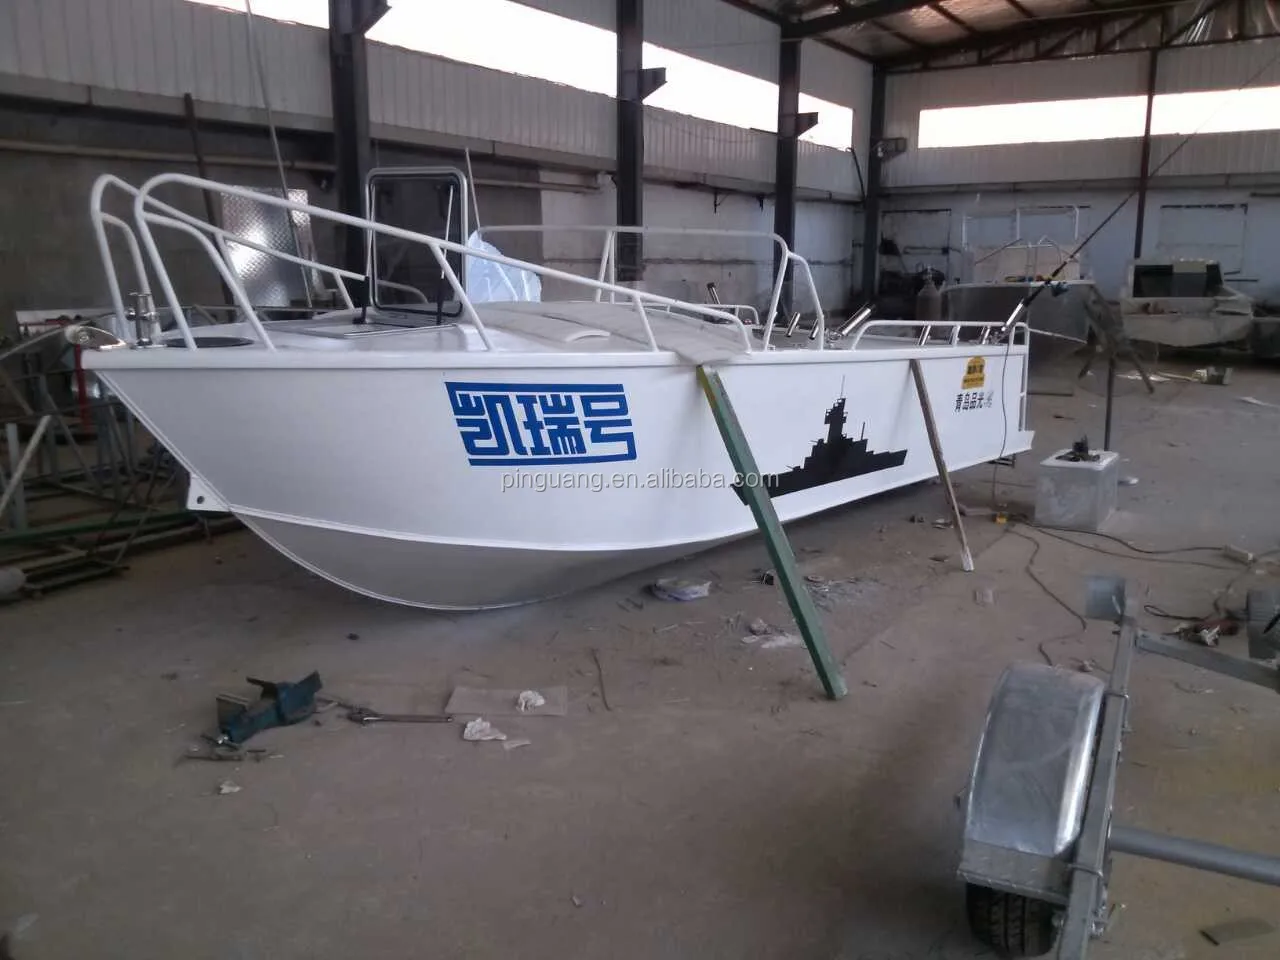 Boat For Sale - Buy Tuna Fishing Vessel For Sale,Aluminum Boats ...